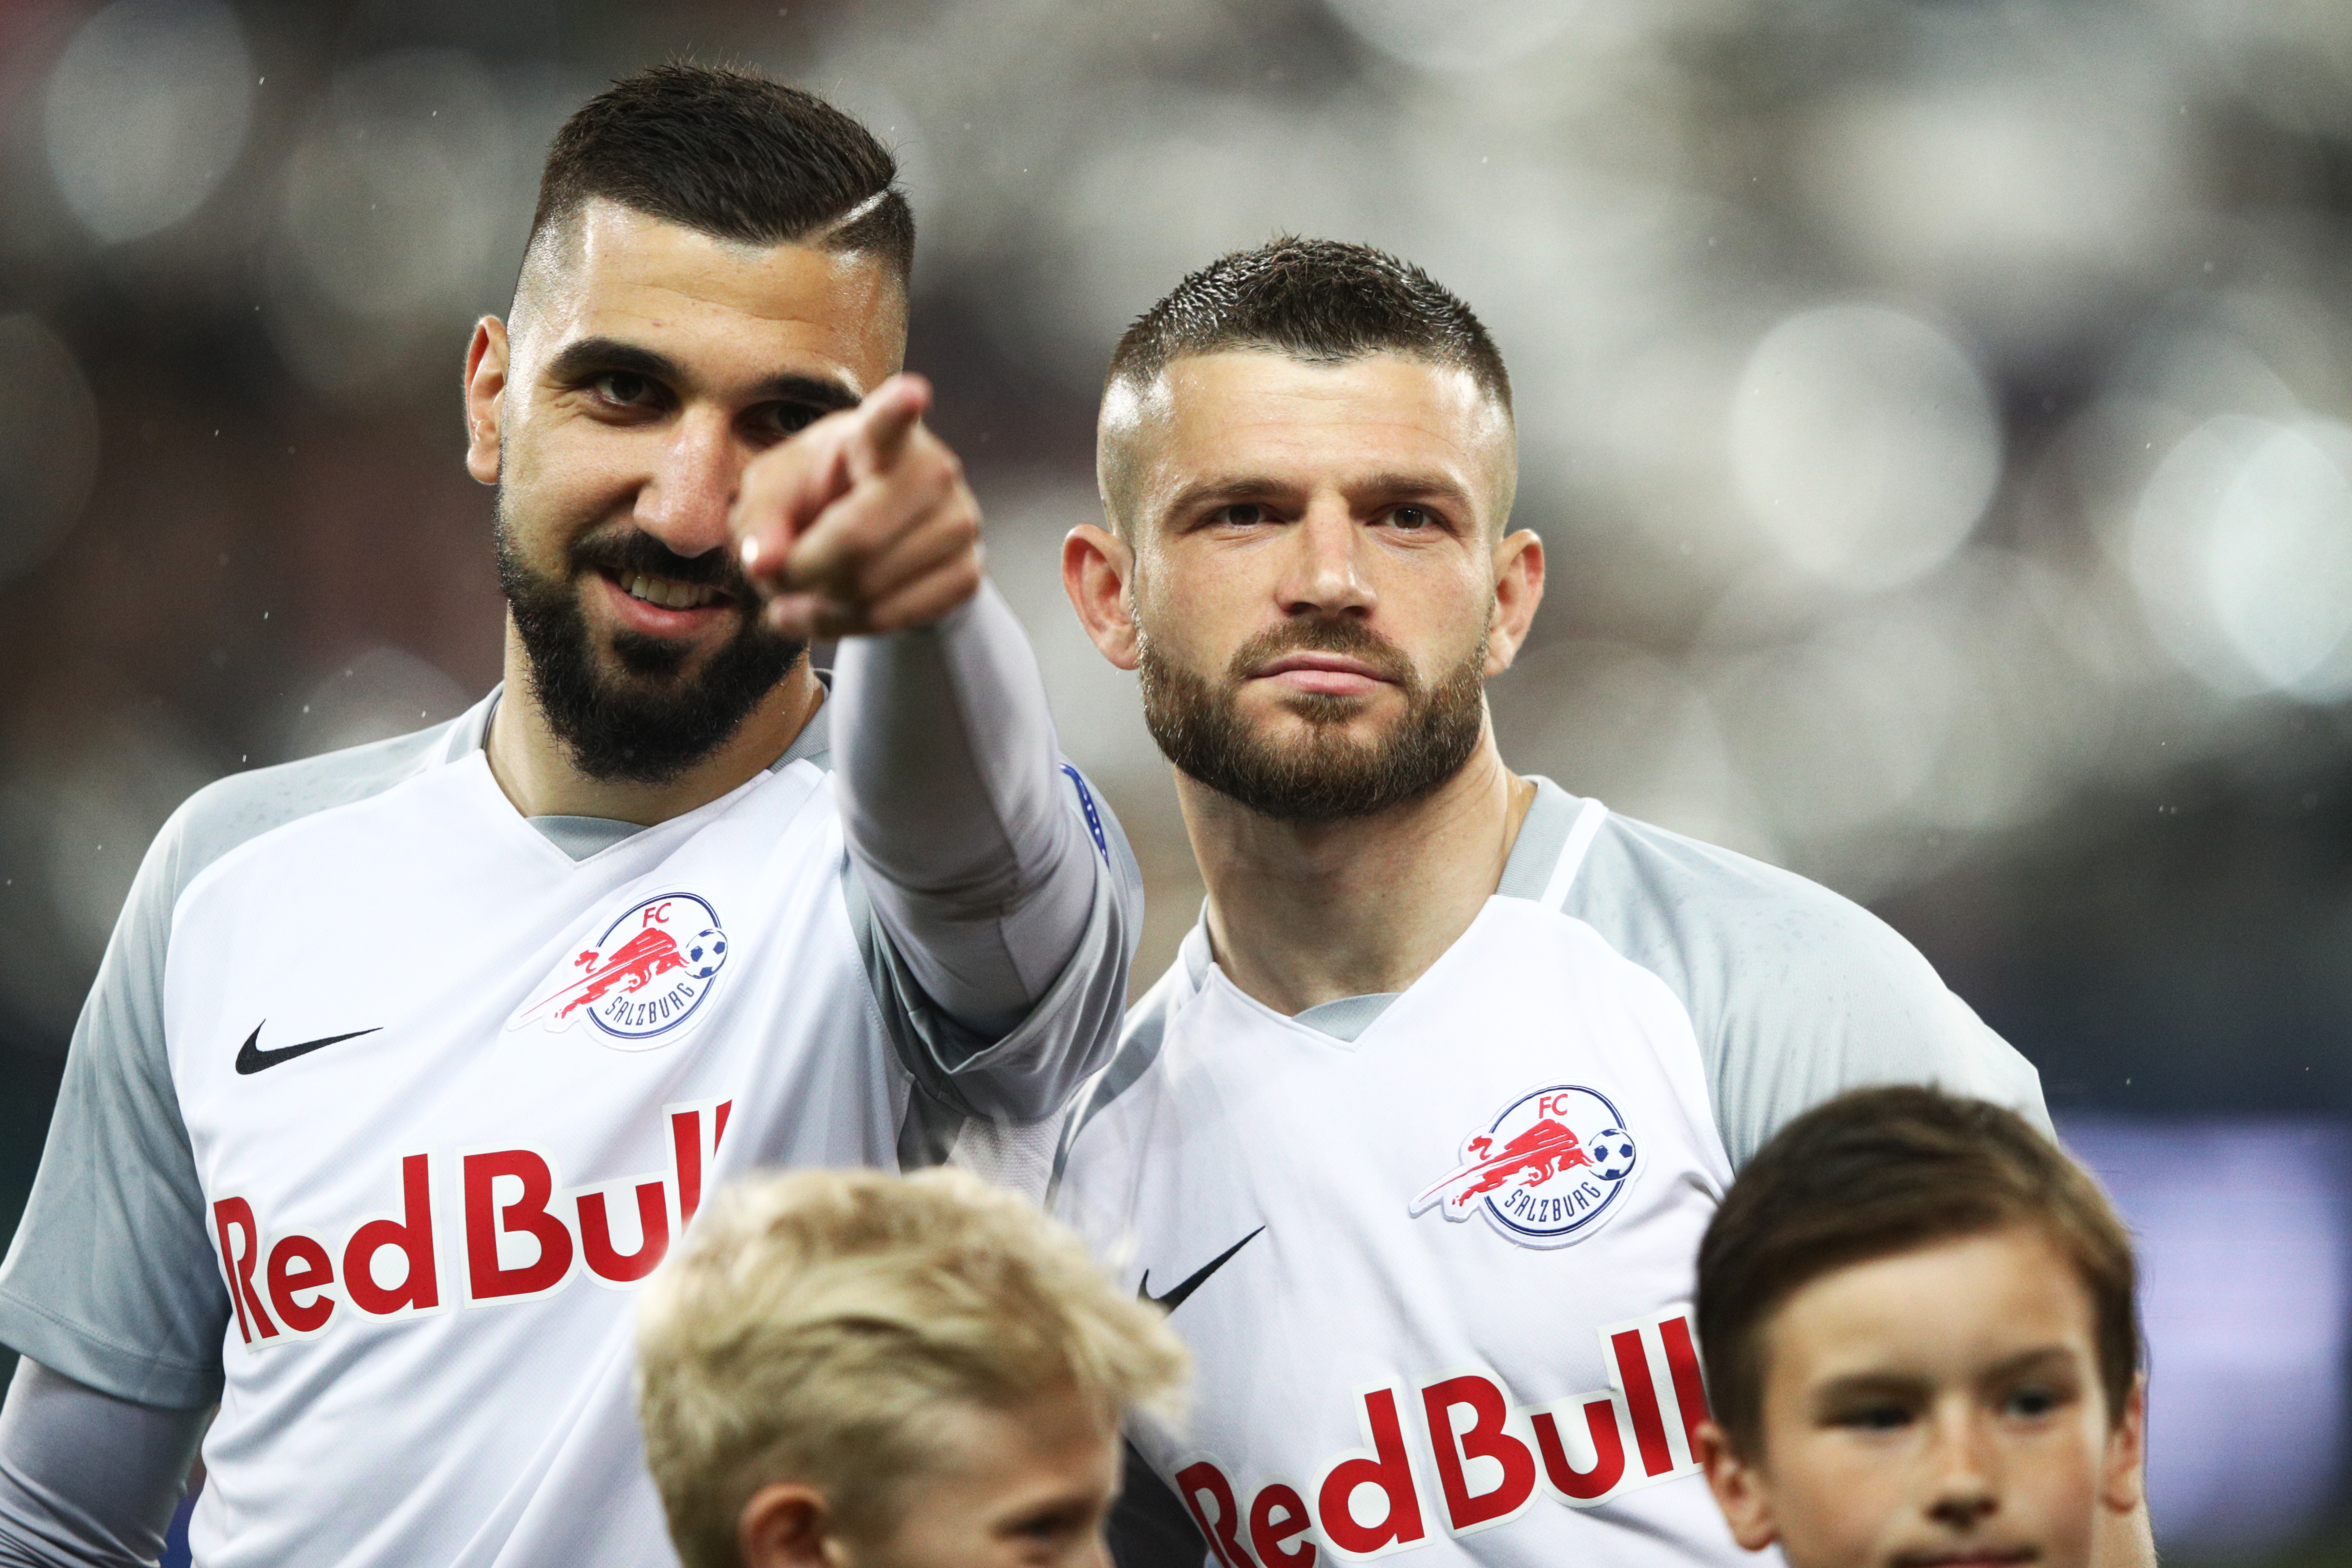 SALZBURG, AUSTRIA - MAY 03:  Valon Berisha and Munas Dabbur of Red Bull Salzburg during the UEFA Europa Semi Final Second leg match between FC Red Bull Salzburg and Olympique de Marseille at Red Bull Arena on May 3, 2018 in Salzburg, Austria.  (Photo by Adam Pretty/Bongarts/Getty Images)